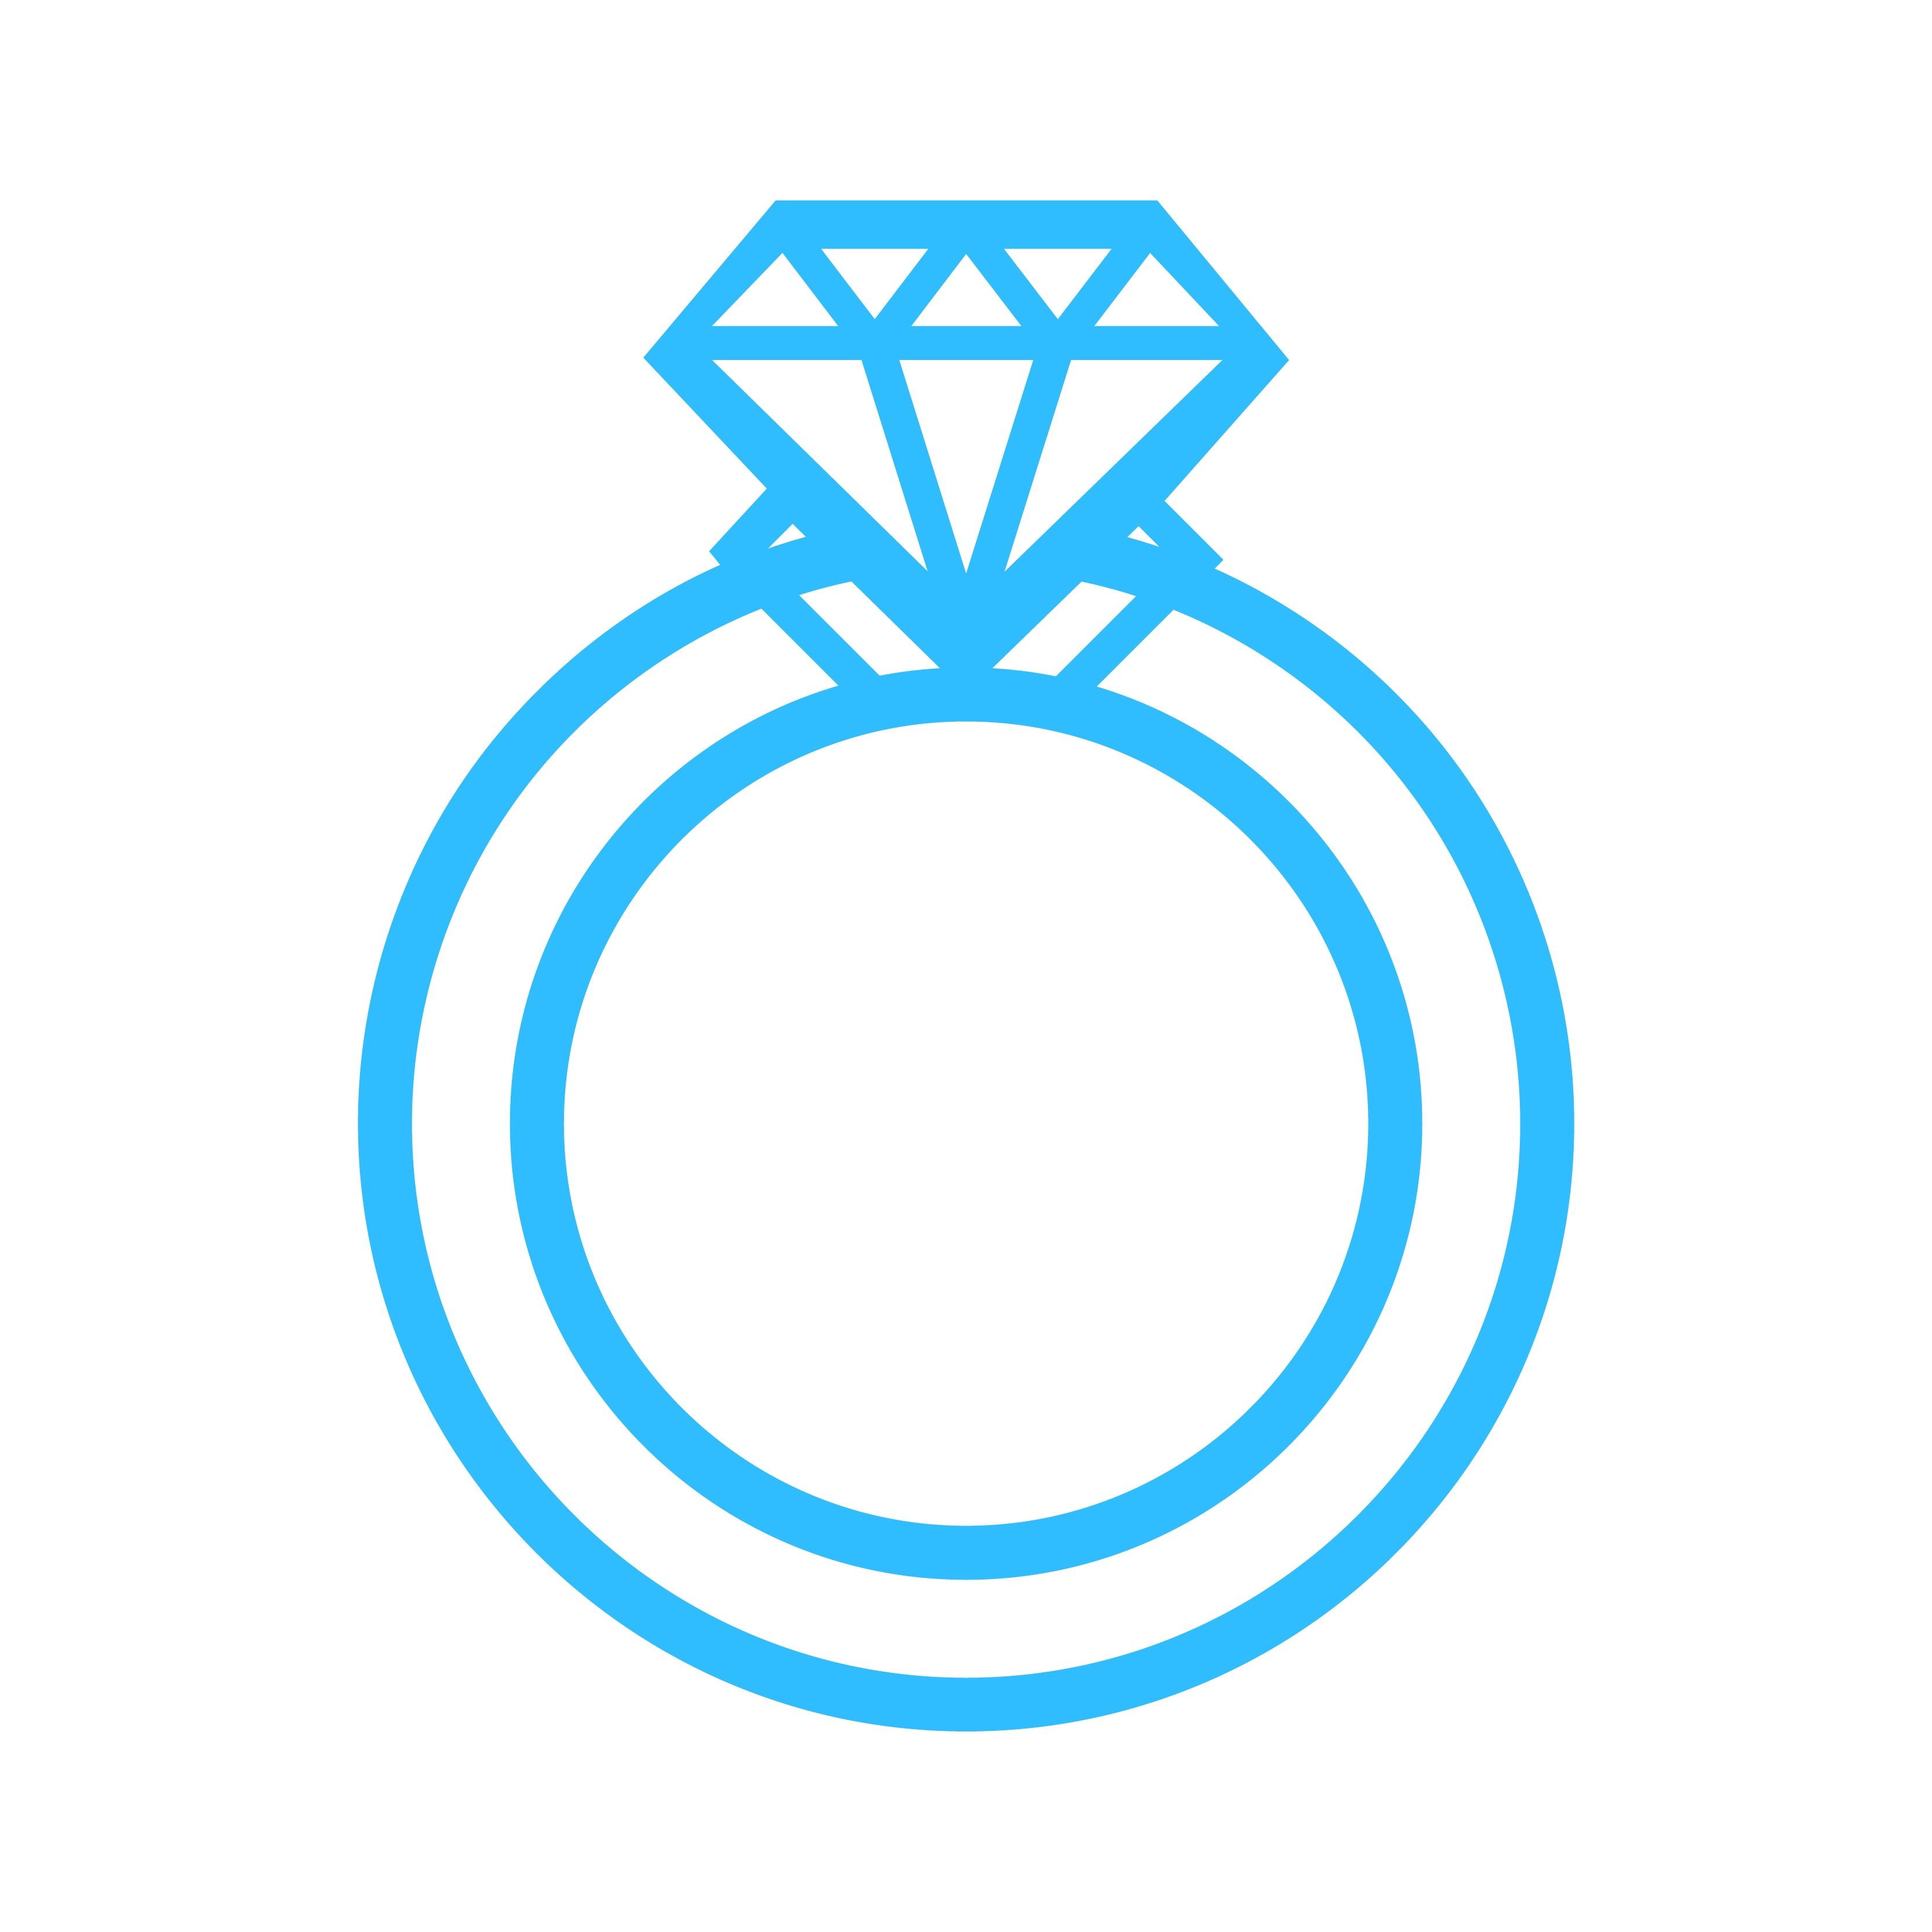 We help guys walk through the engagement ring buying process by taking them straight to the wholesale vendors and bypassing the retail store markups.